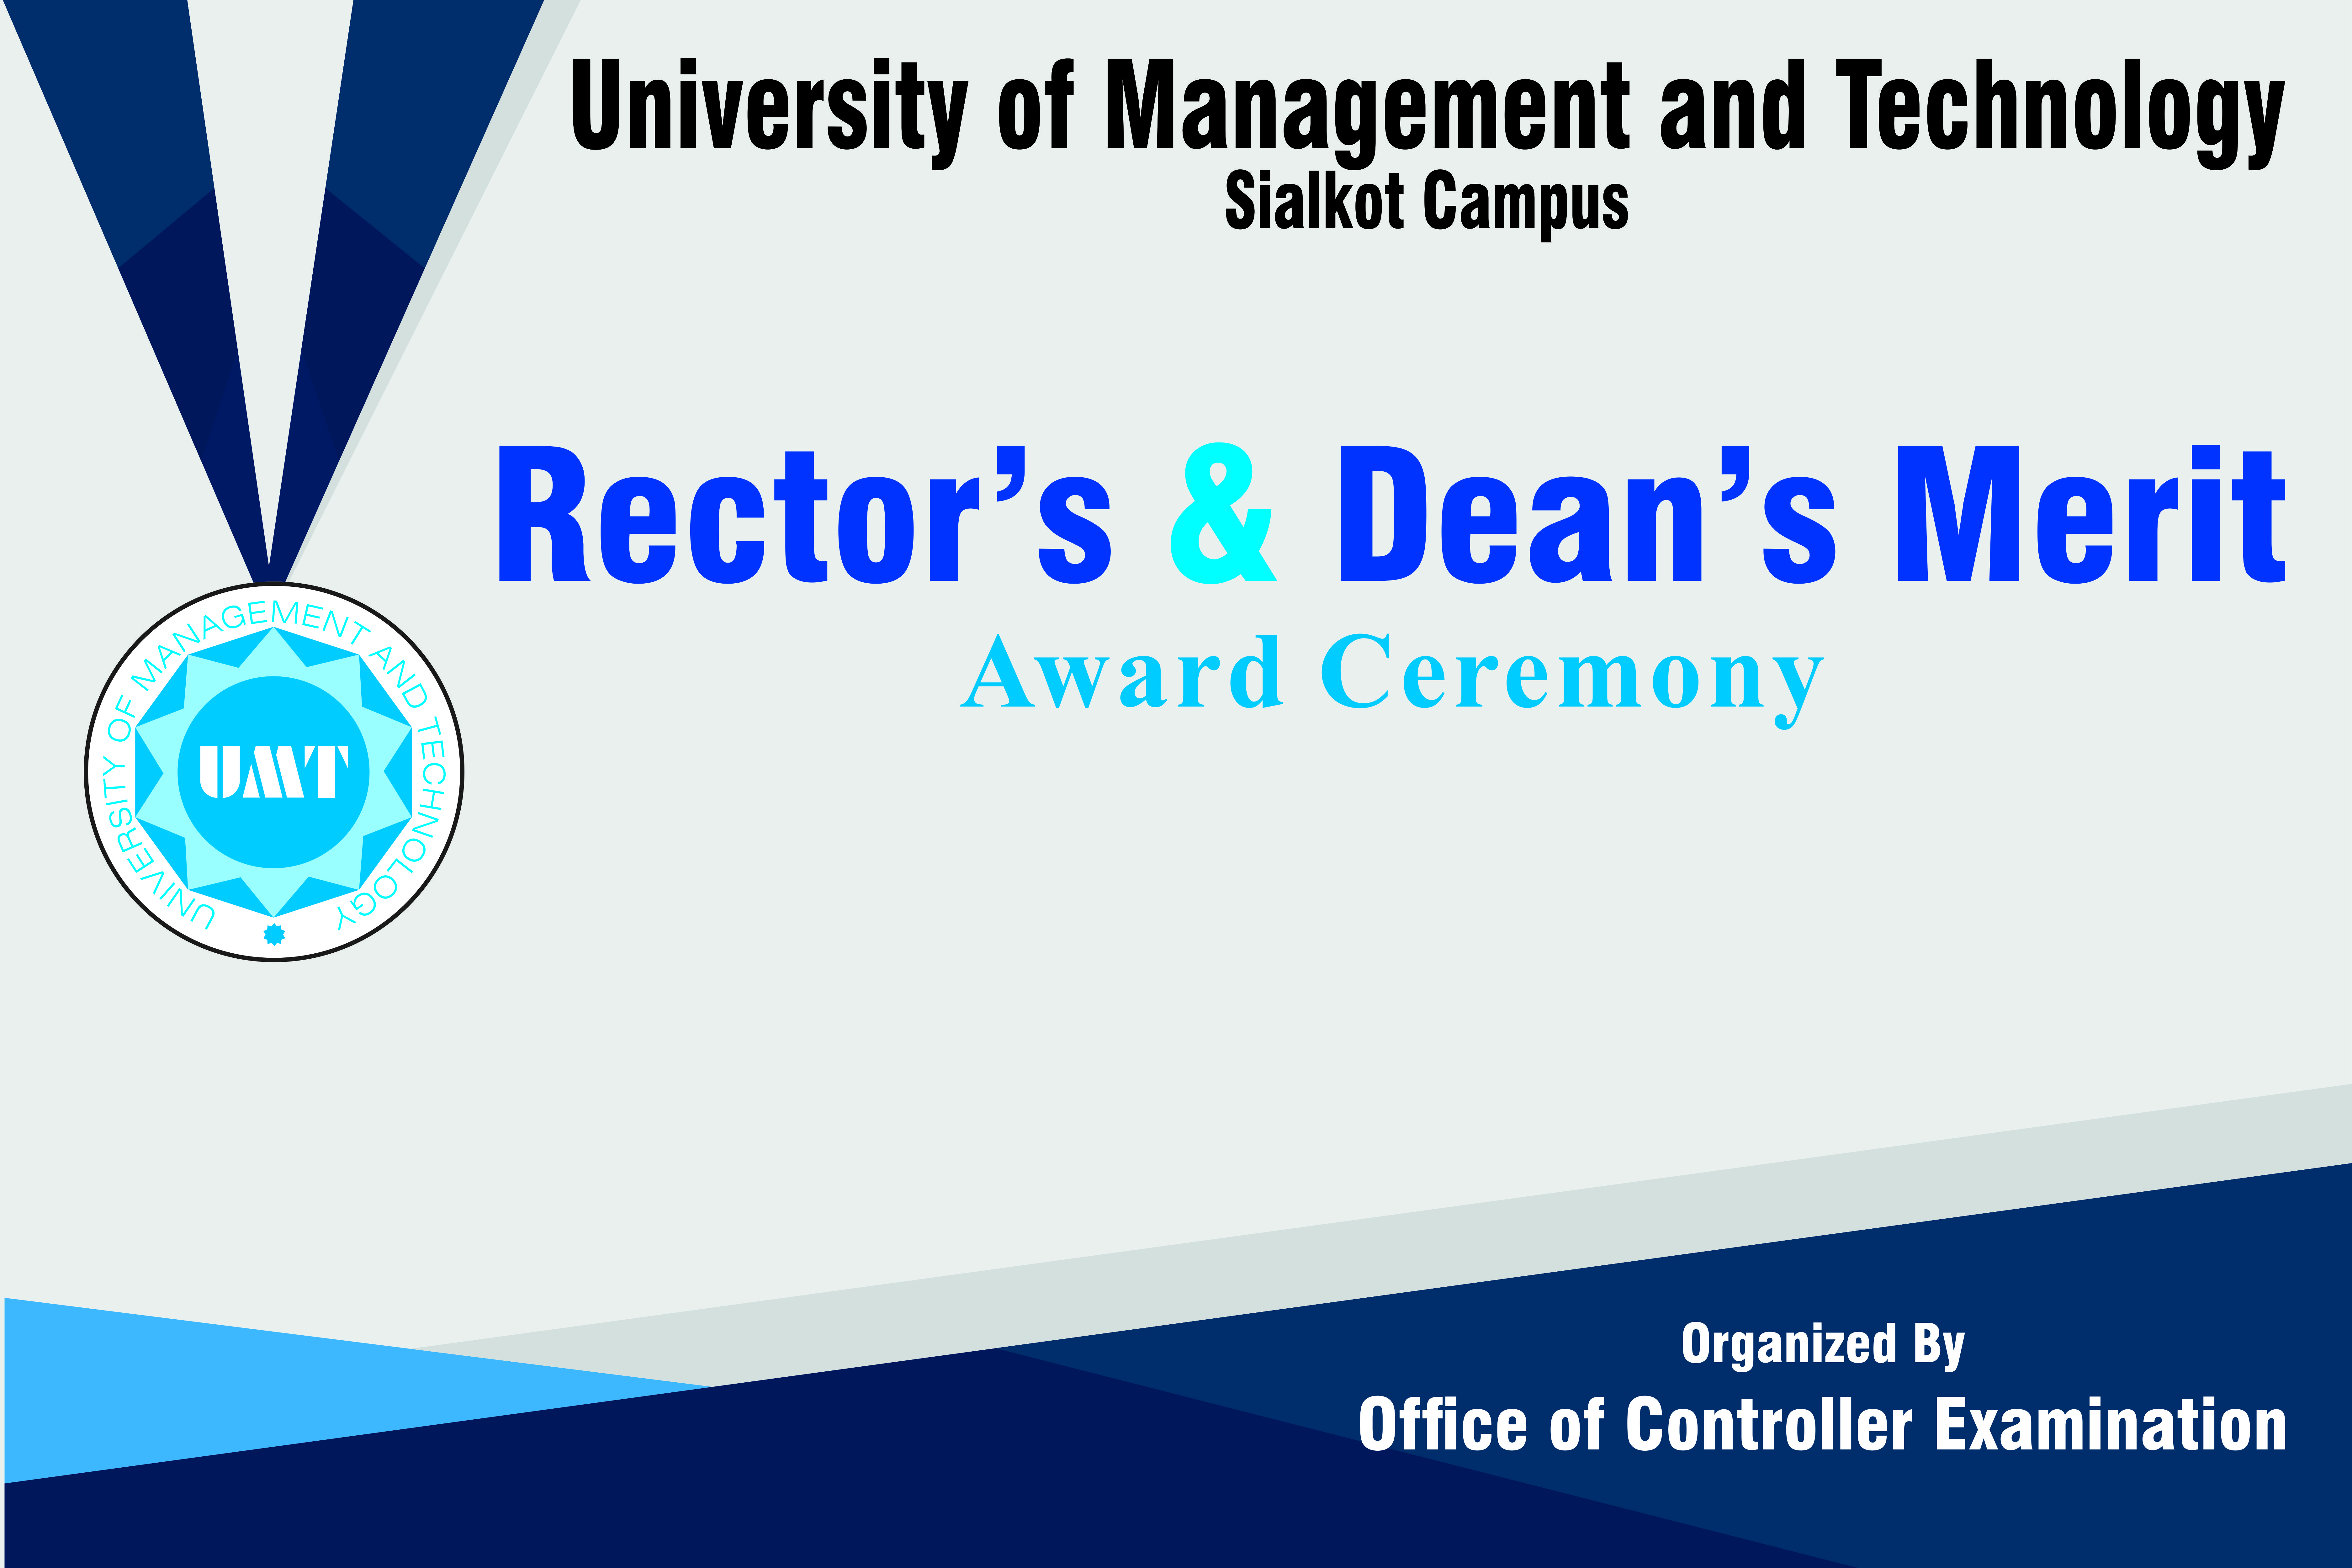 Rector’s / Dean’s Merit Award Ceremony for Fall 2015, Spring 2016 will be held on Saturday, March 11, 2017